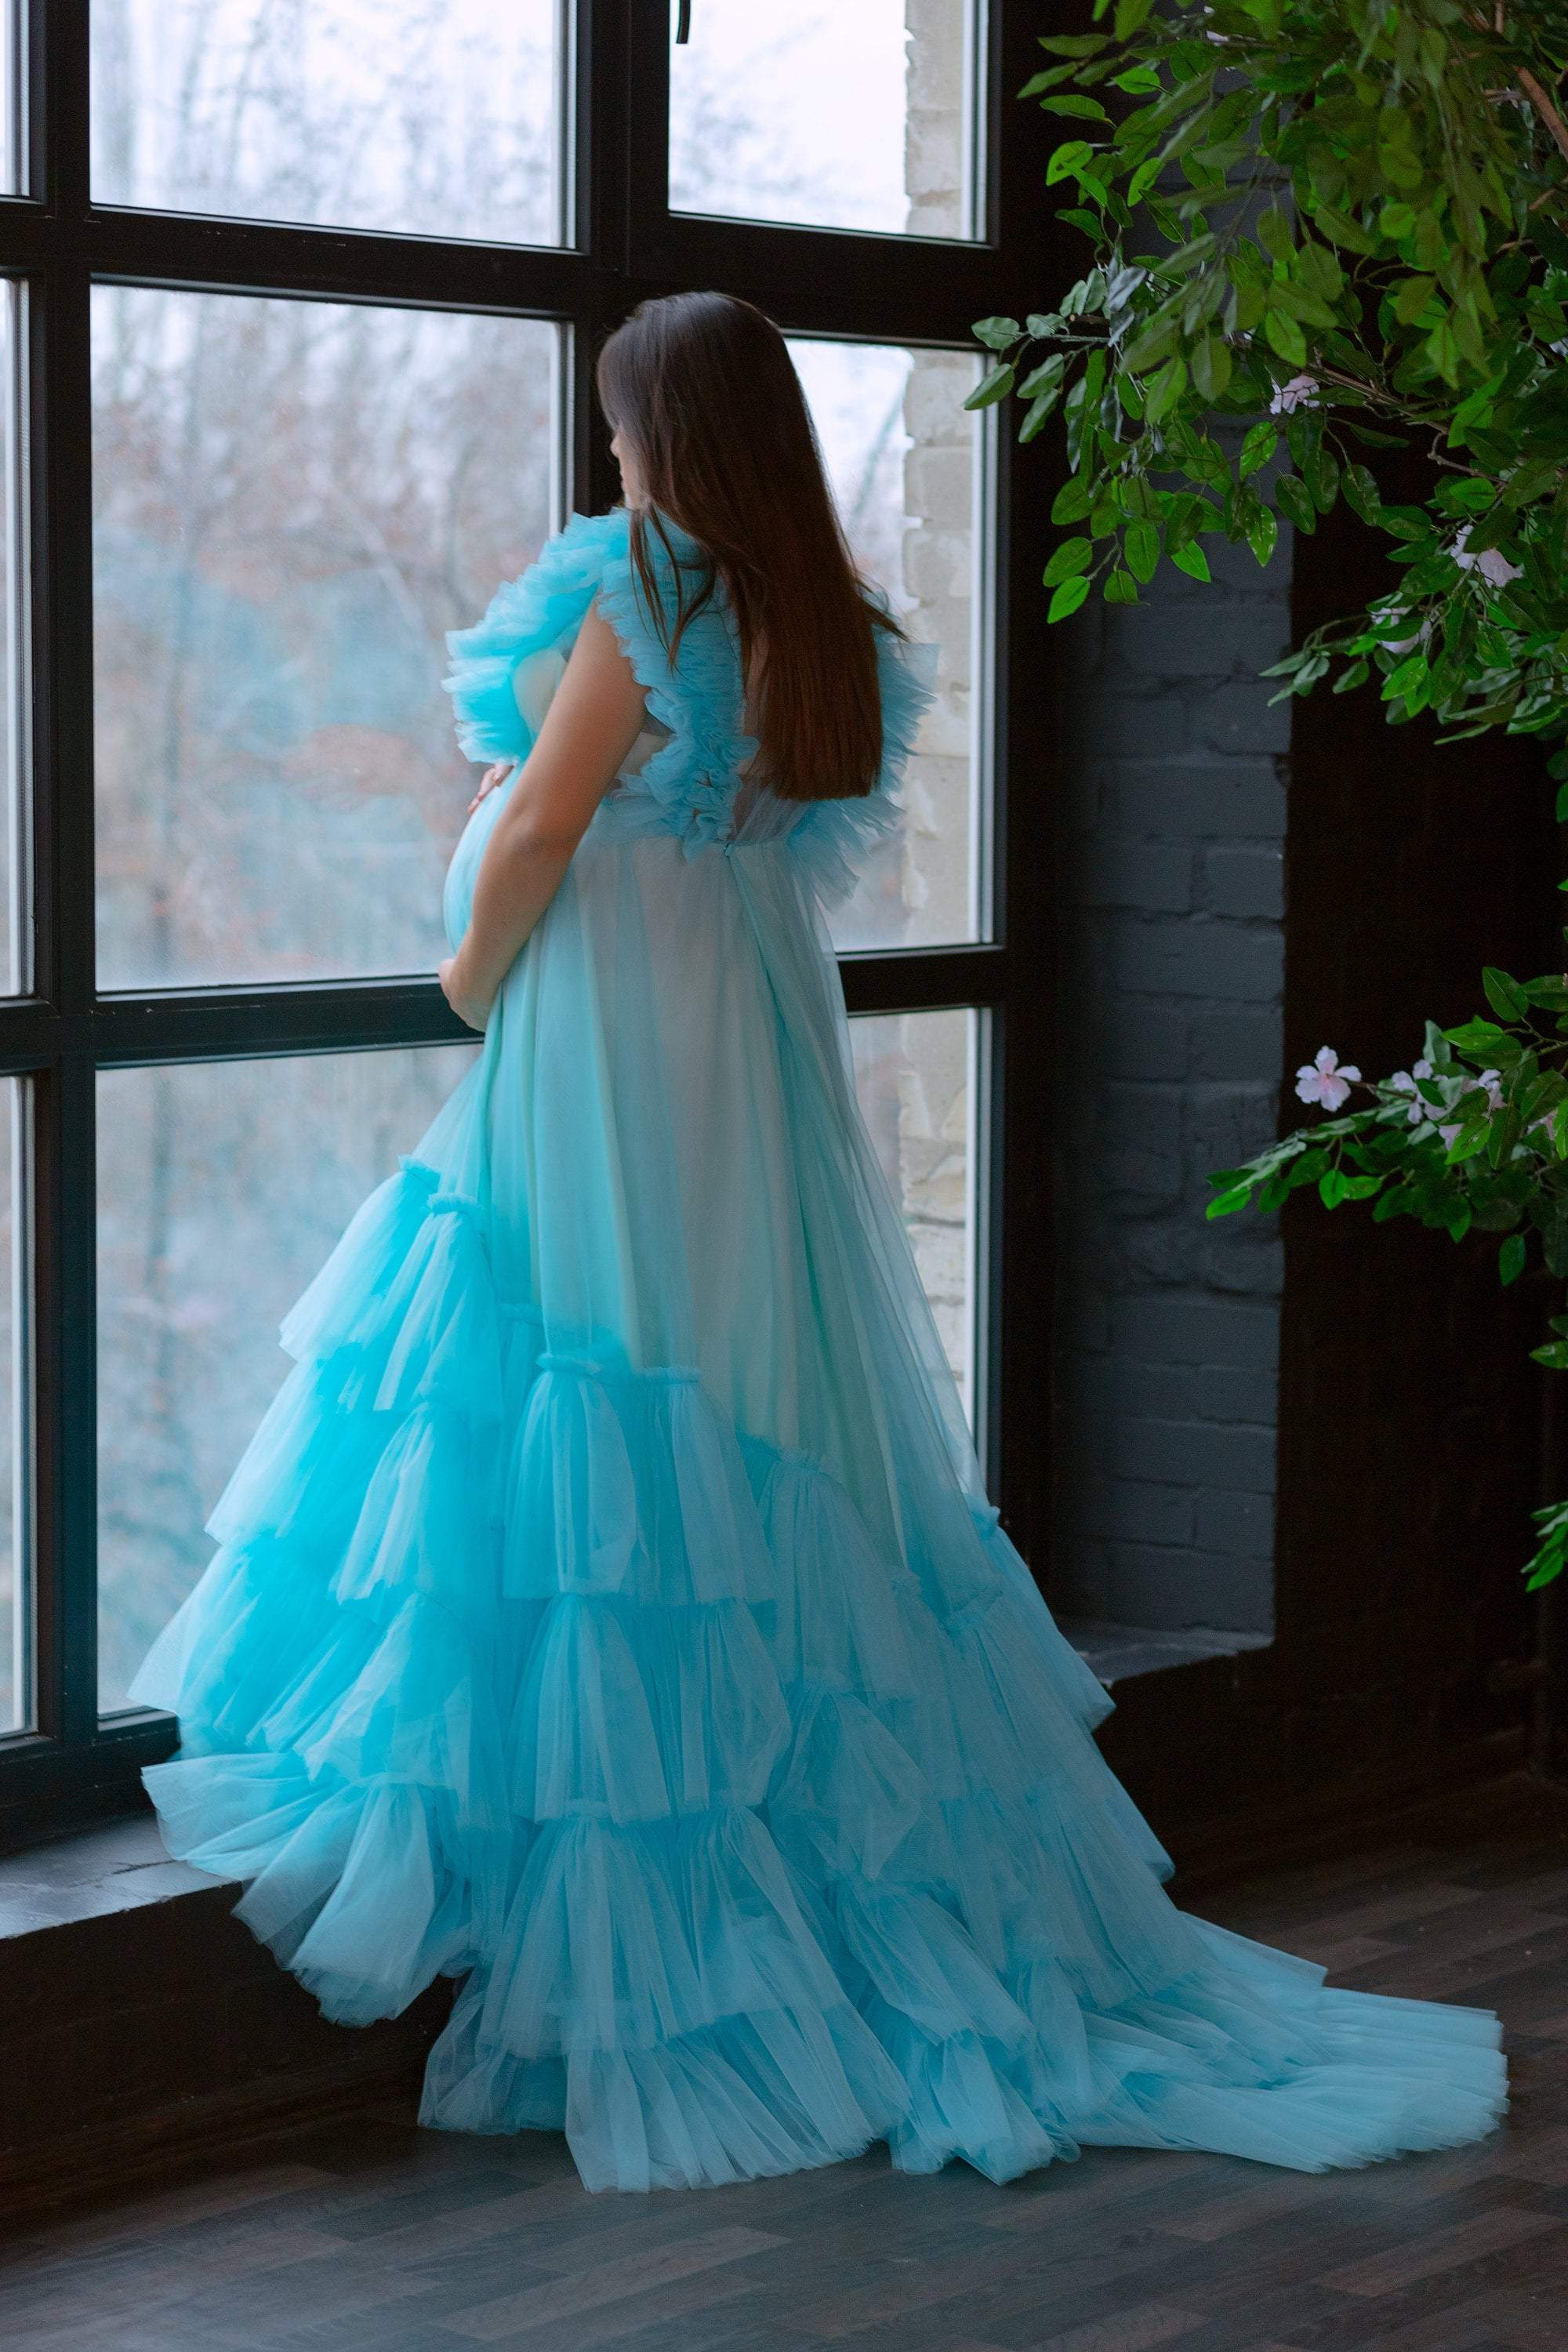 Sexy Royal Blue Tulle Ball Gown Tiered Tulle Prom Dress With Ruffle Detail  For Baby Shower And Photography Shoots From Newdeve, $69.34